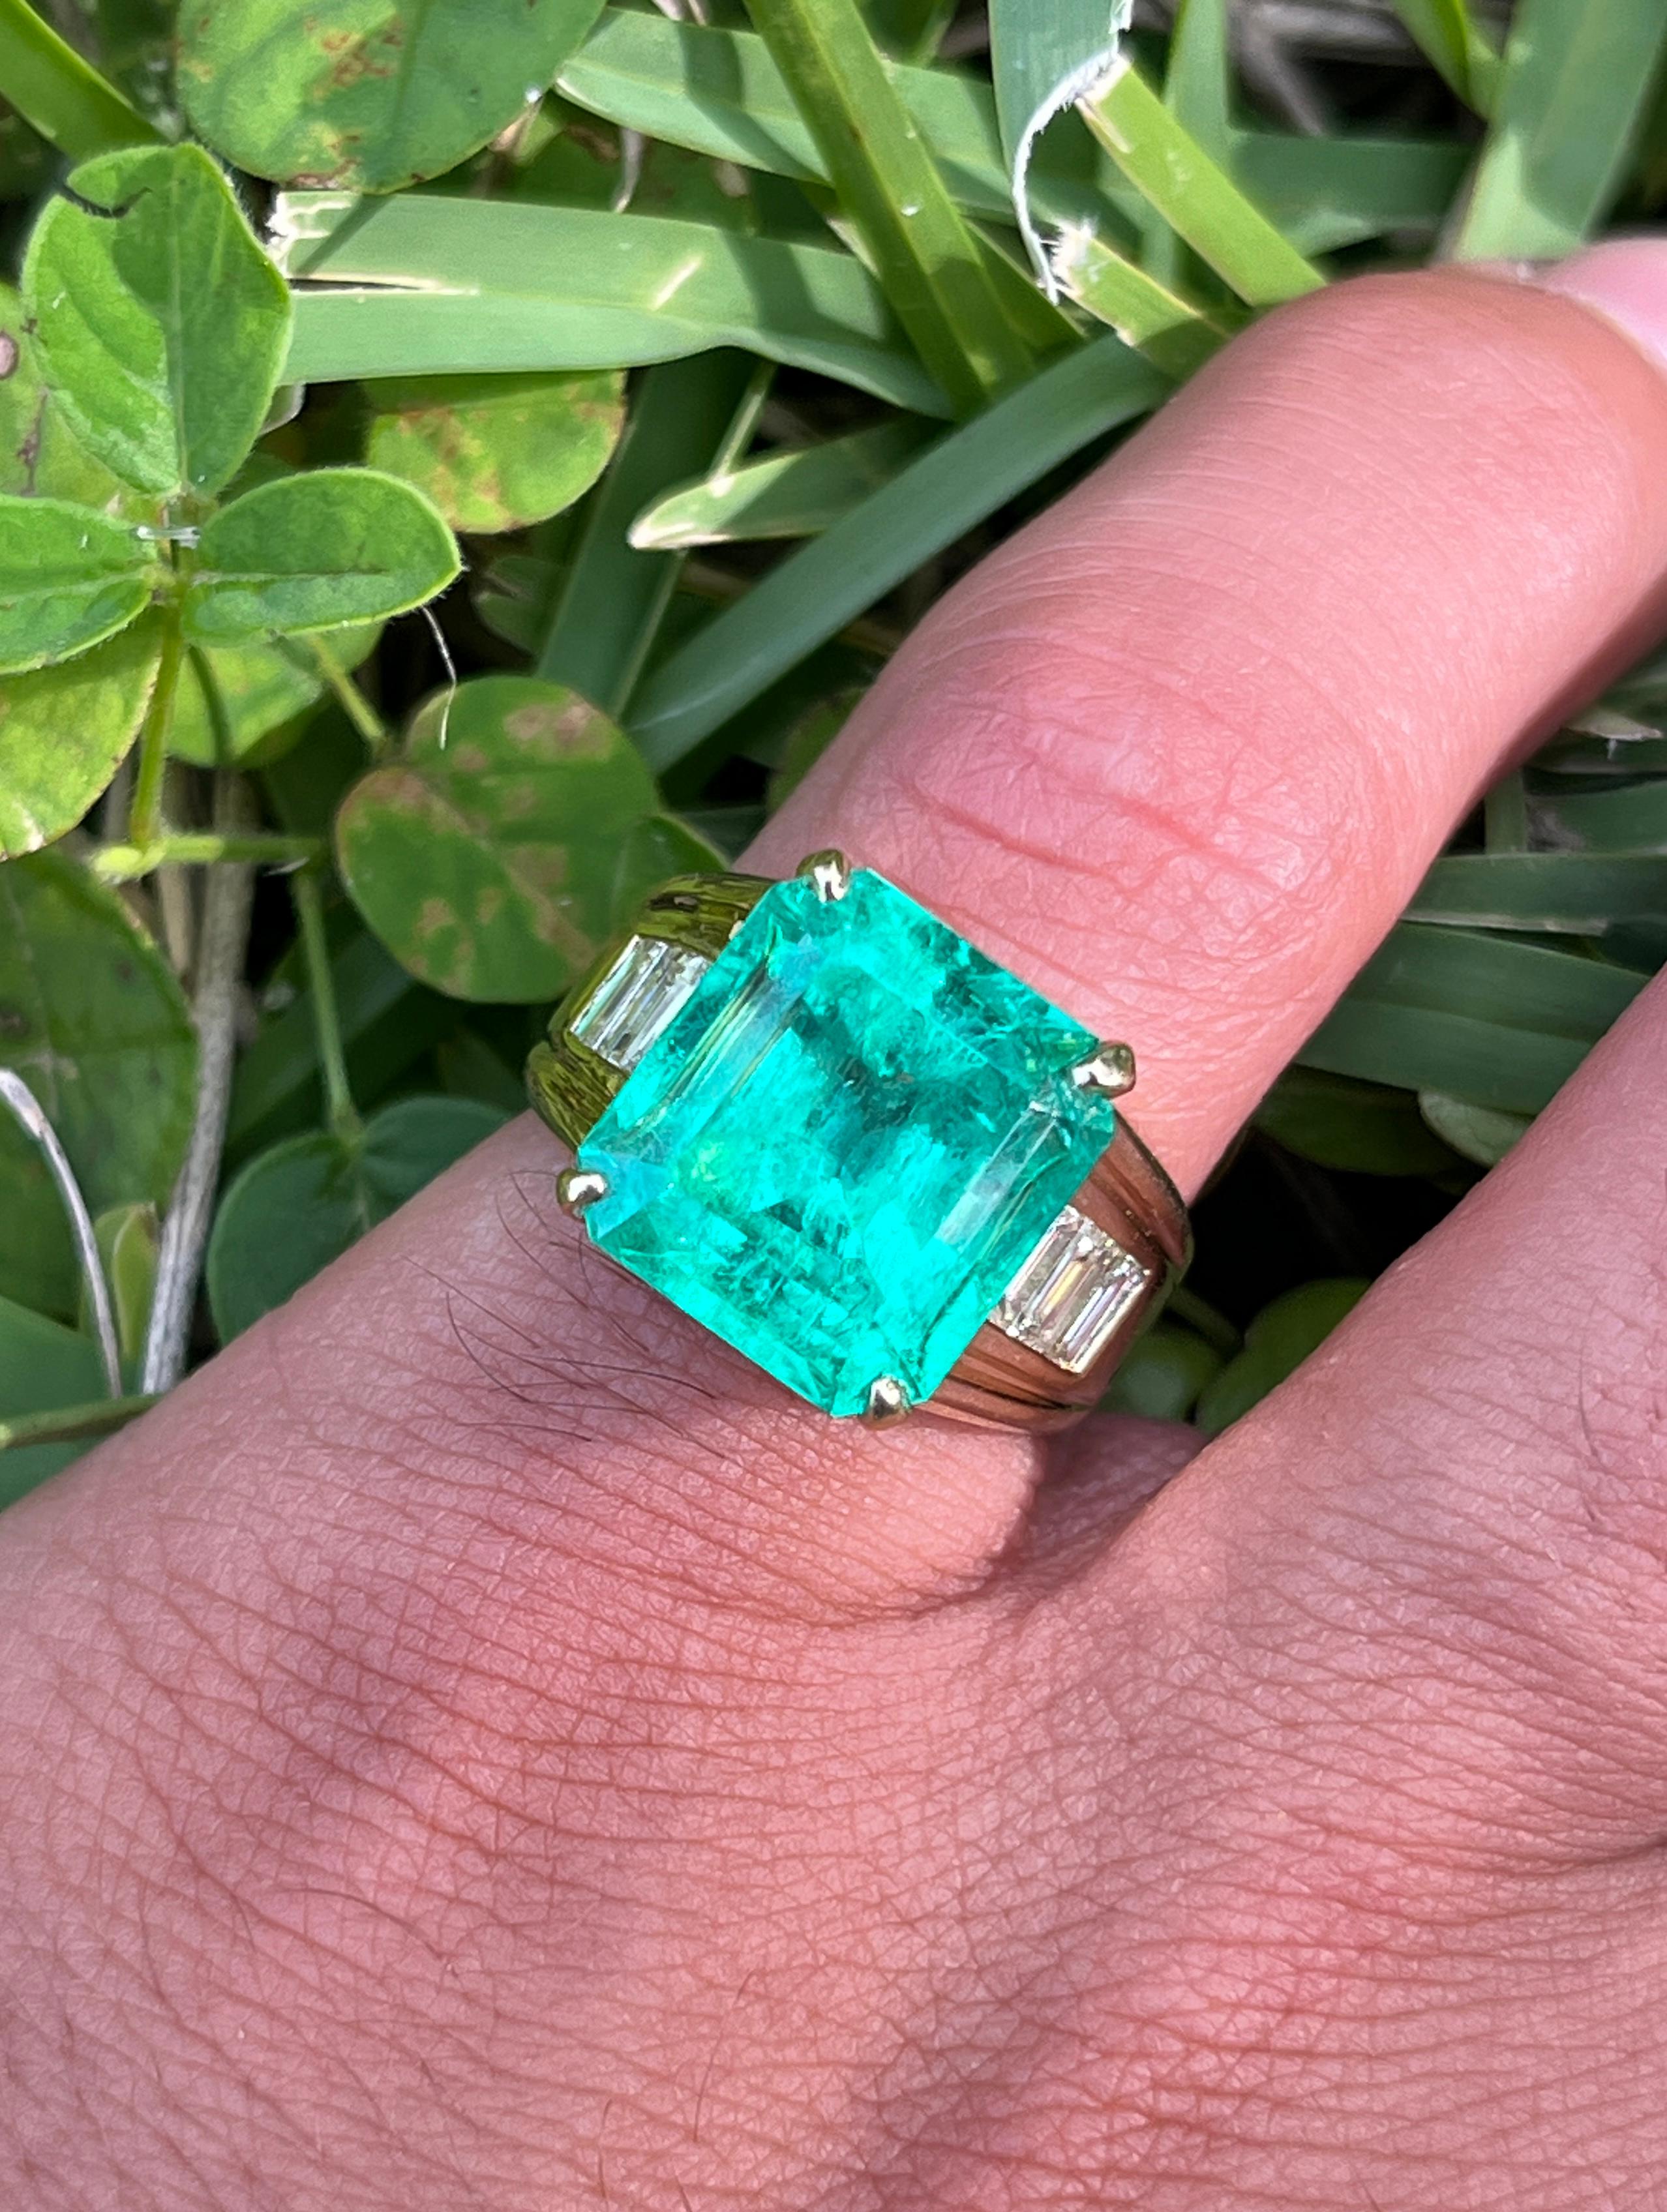 GIA Certified 8.64 Carat Colombian Emerald & Baguette Diamond Ring in 18K Gold  For Sale 3